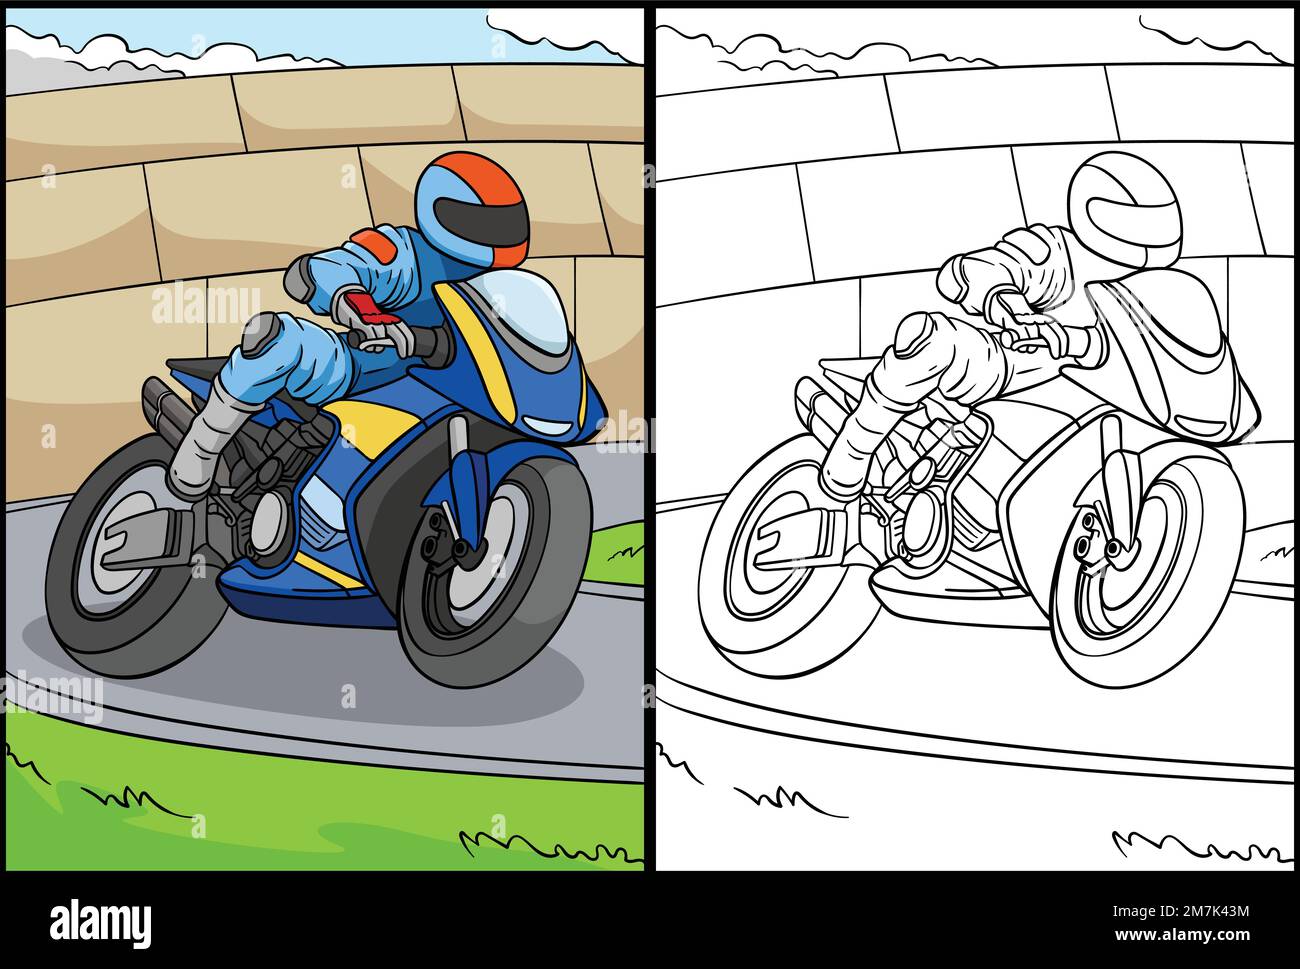 Motorcycle Racing Coloring Page Illustration Stock Vector